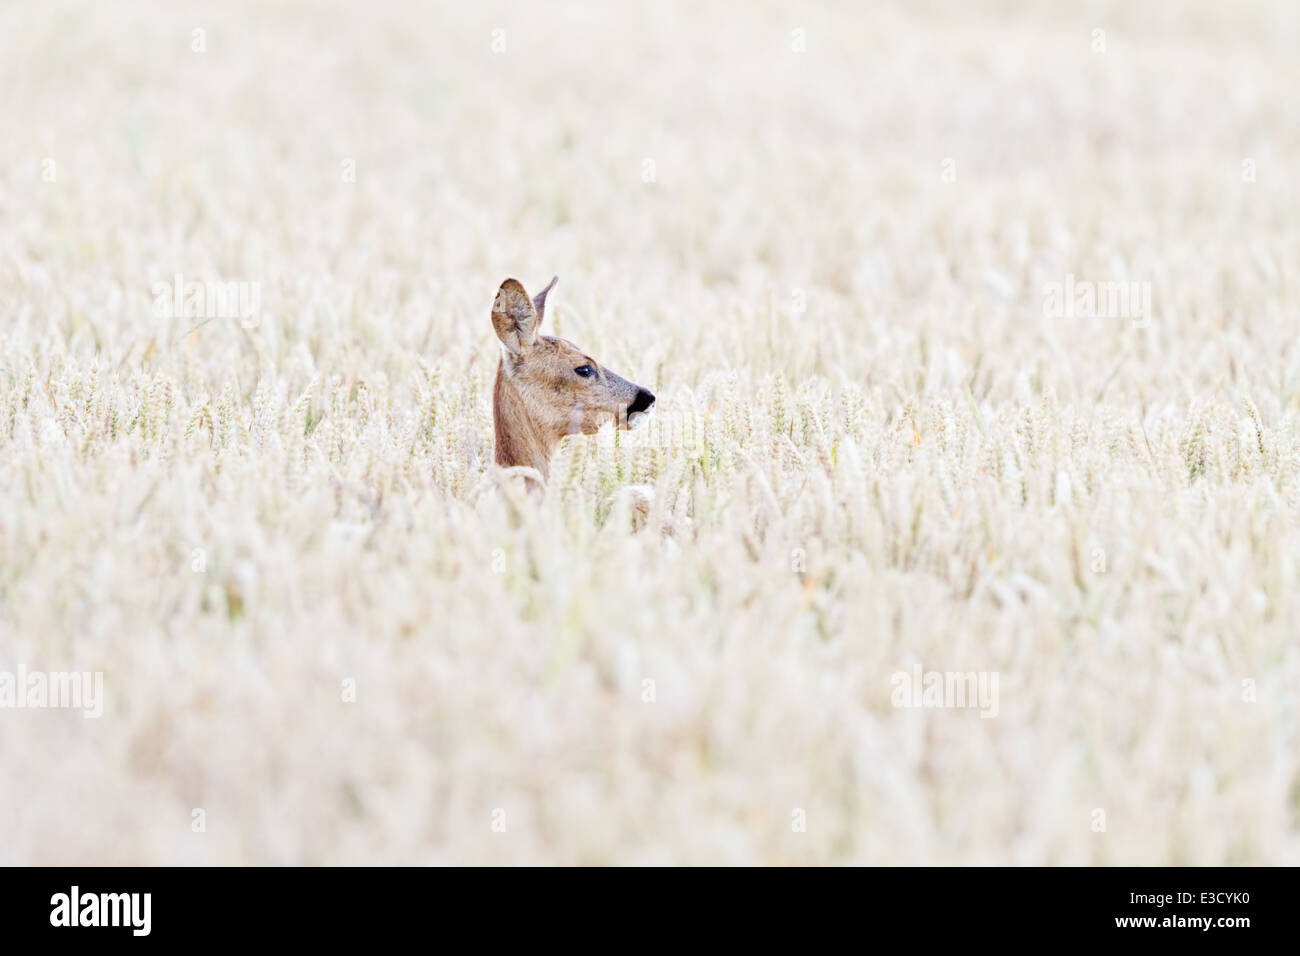 A female Roe deer hides in an arable field during the Roe deer's annual rut in the summer, Norfolk, England Stock Photo